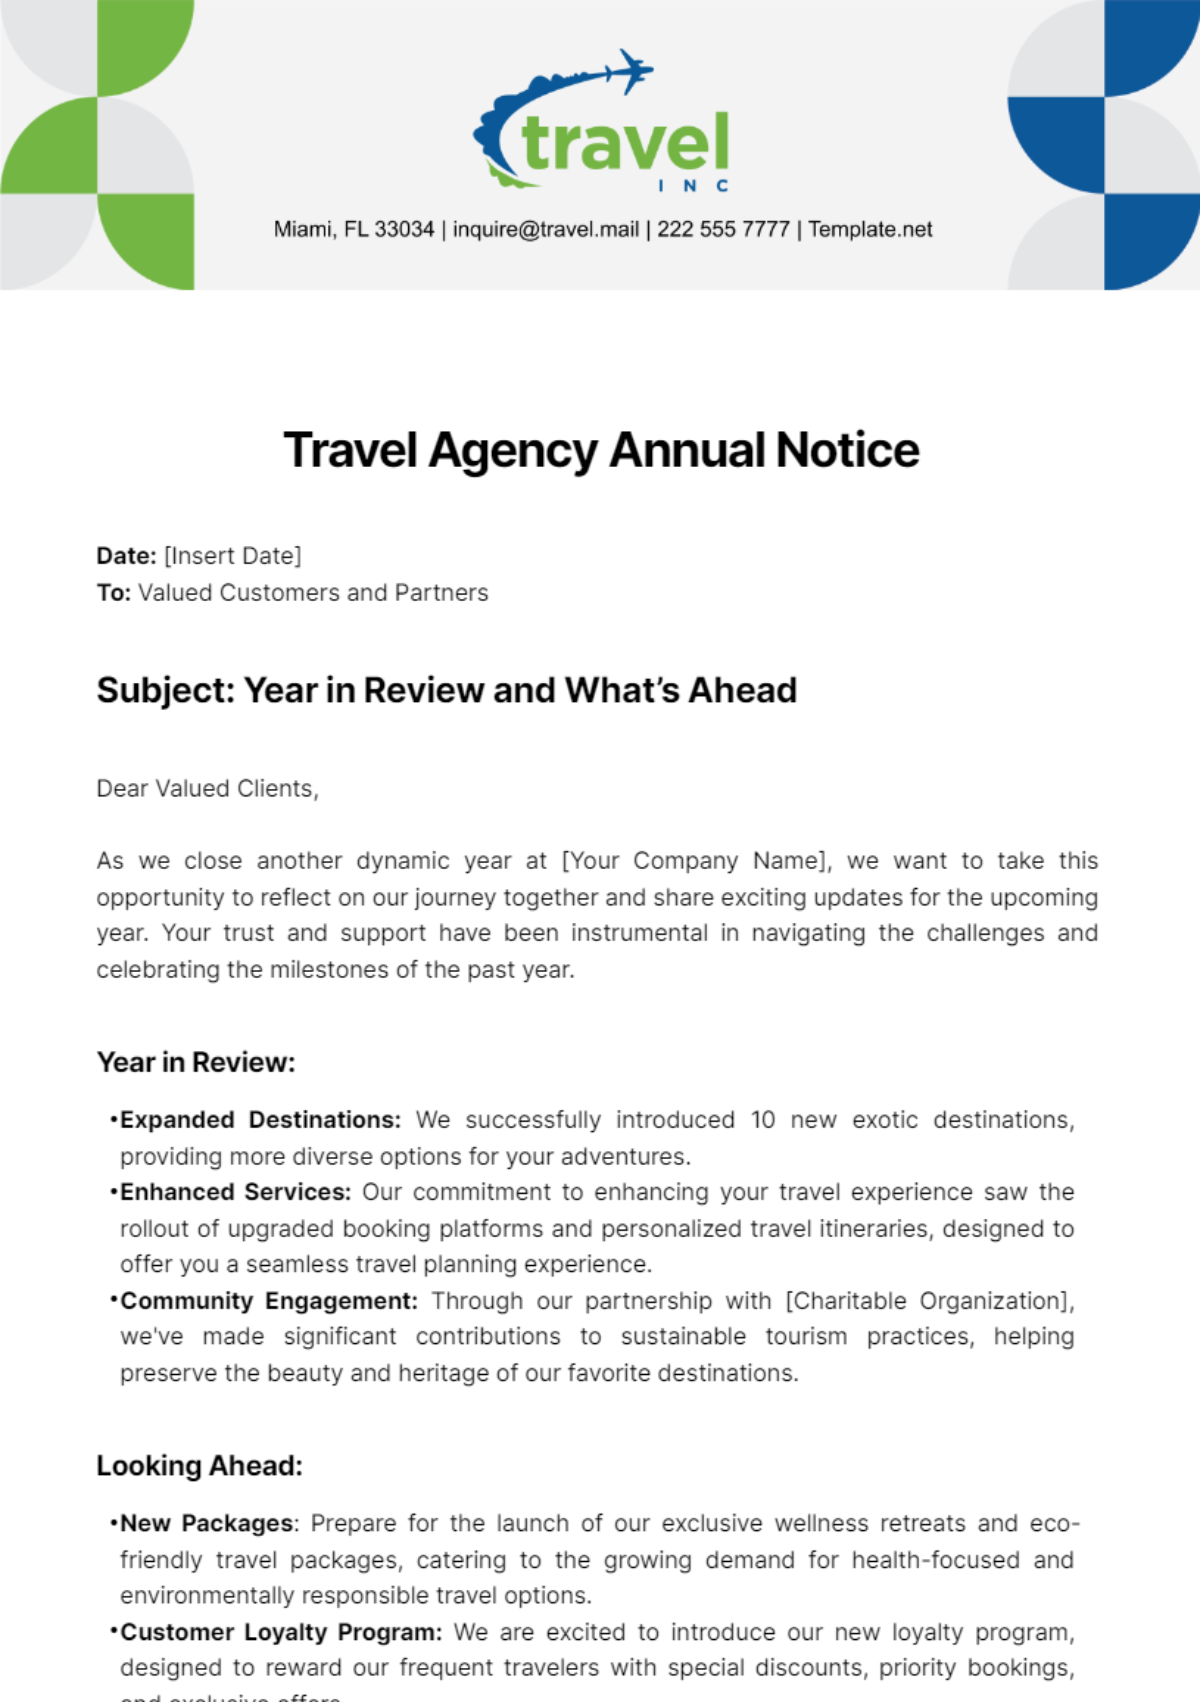 Travel Agency Annual Notice Template